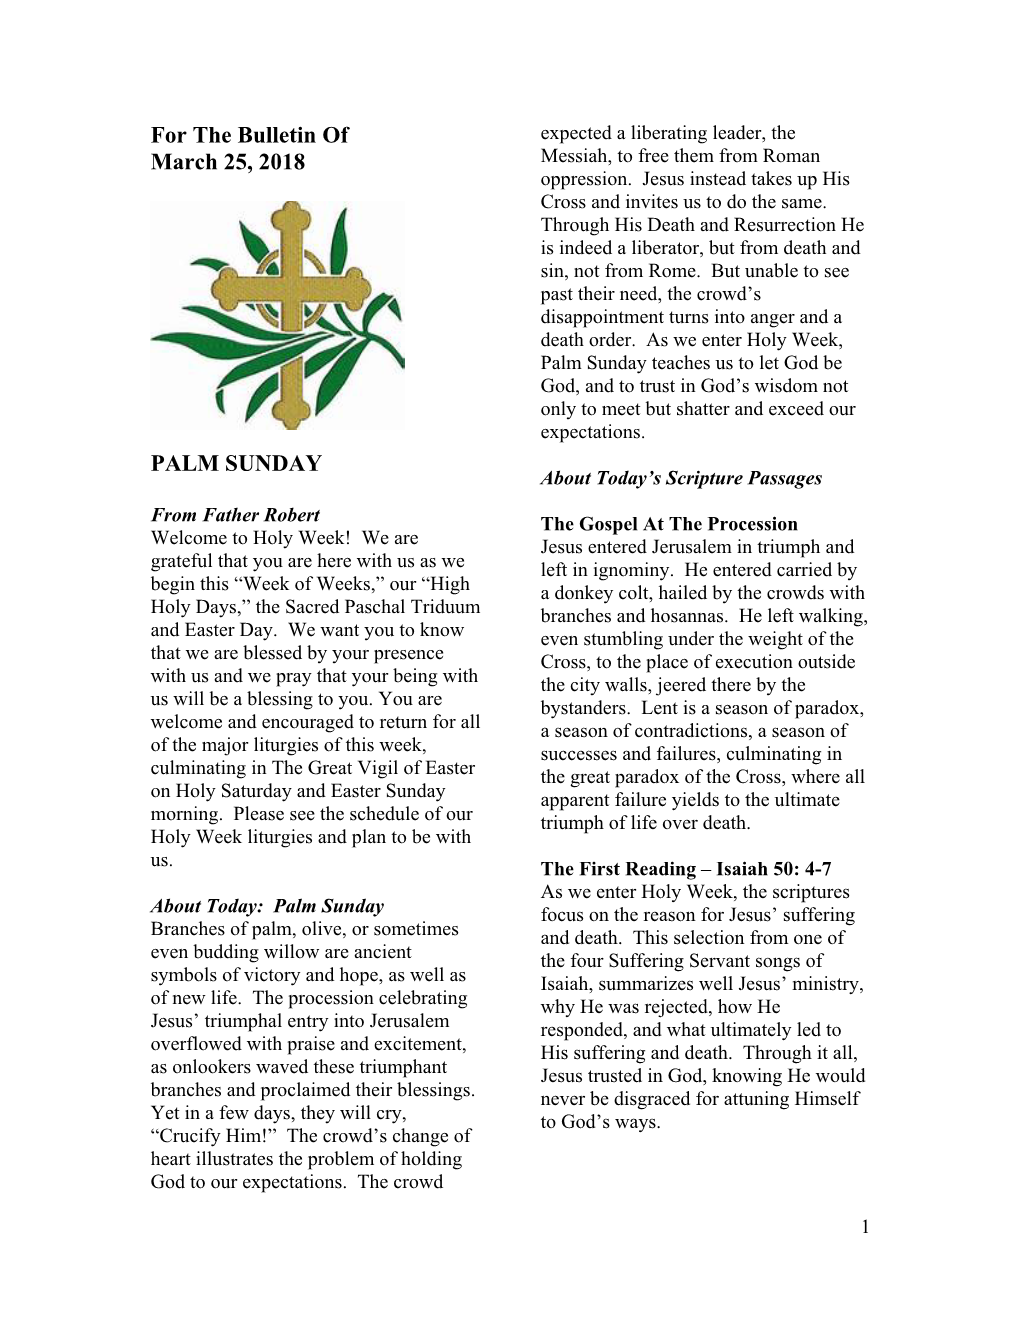 For the Bulletin of March 25, 2018 PALM SUNDAY